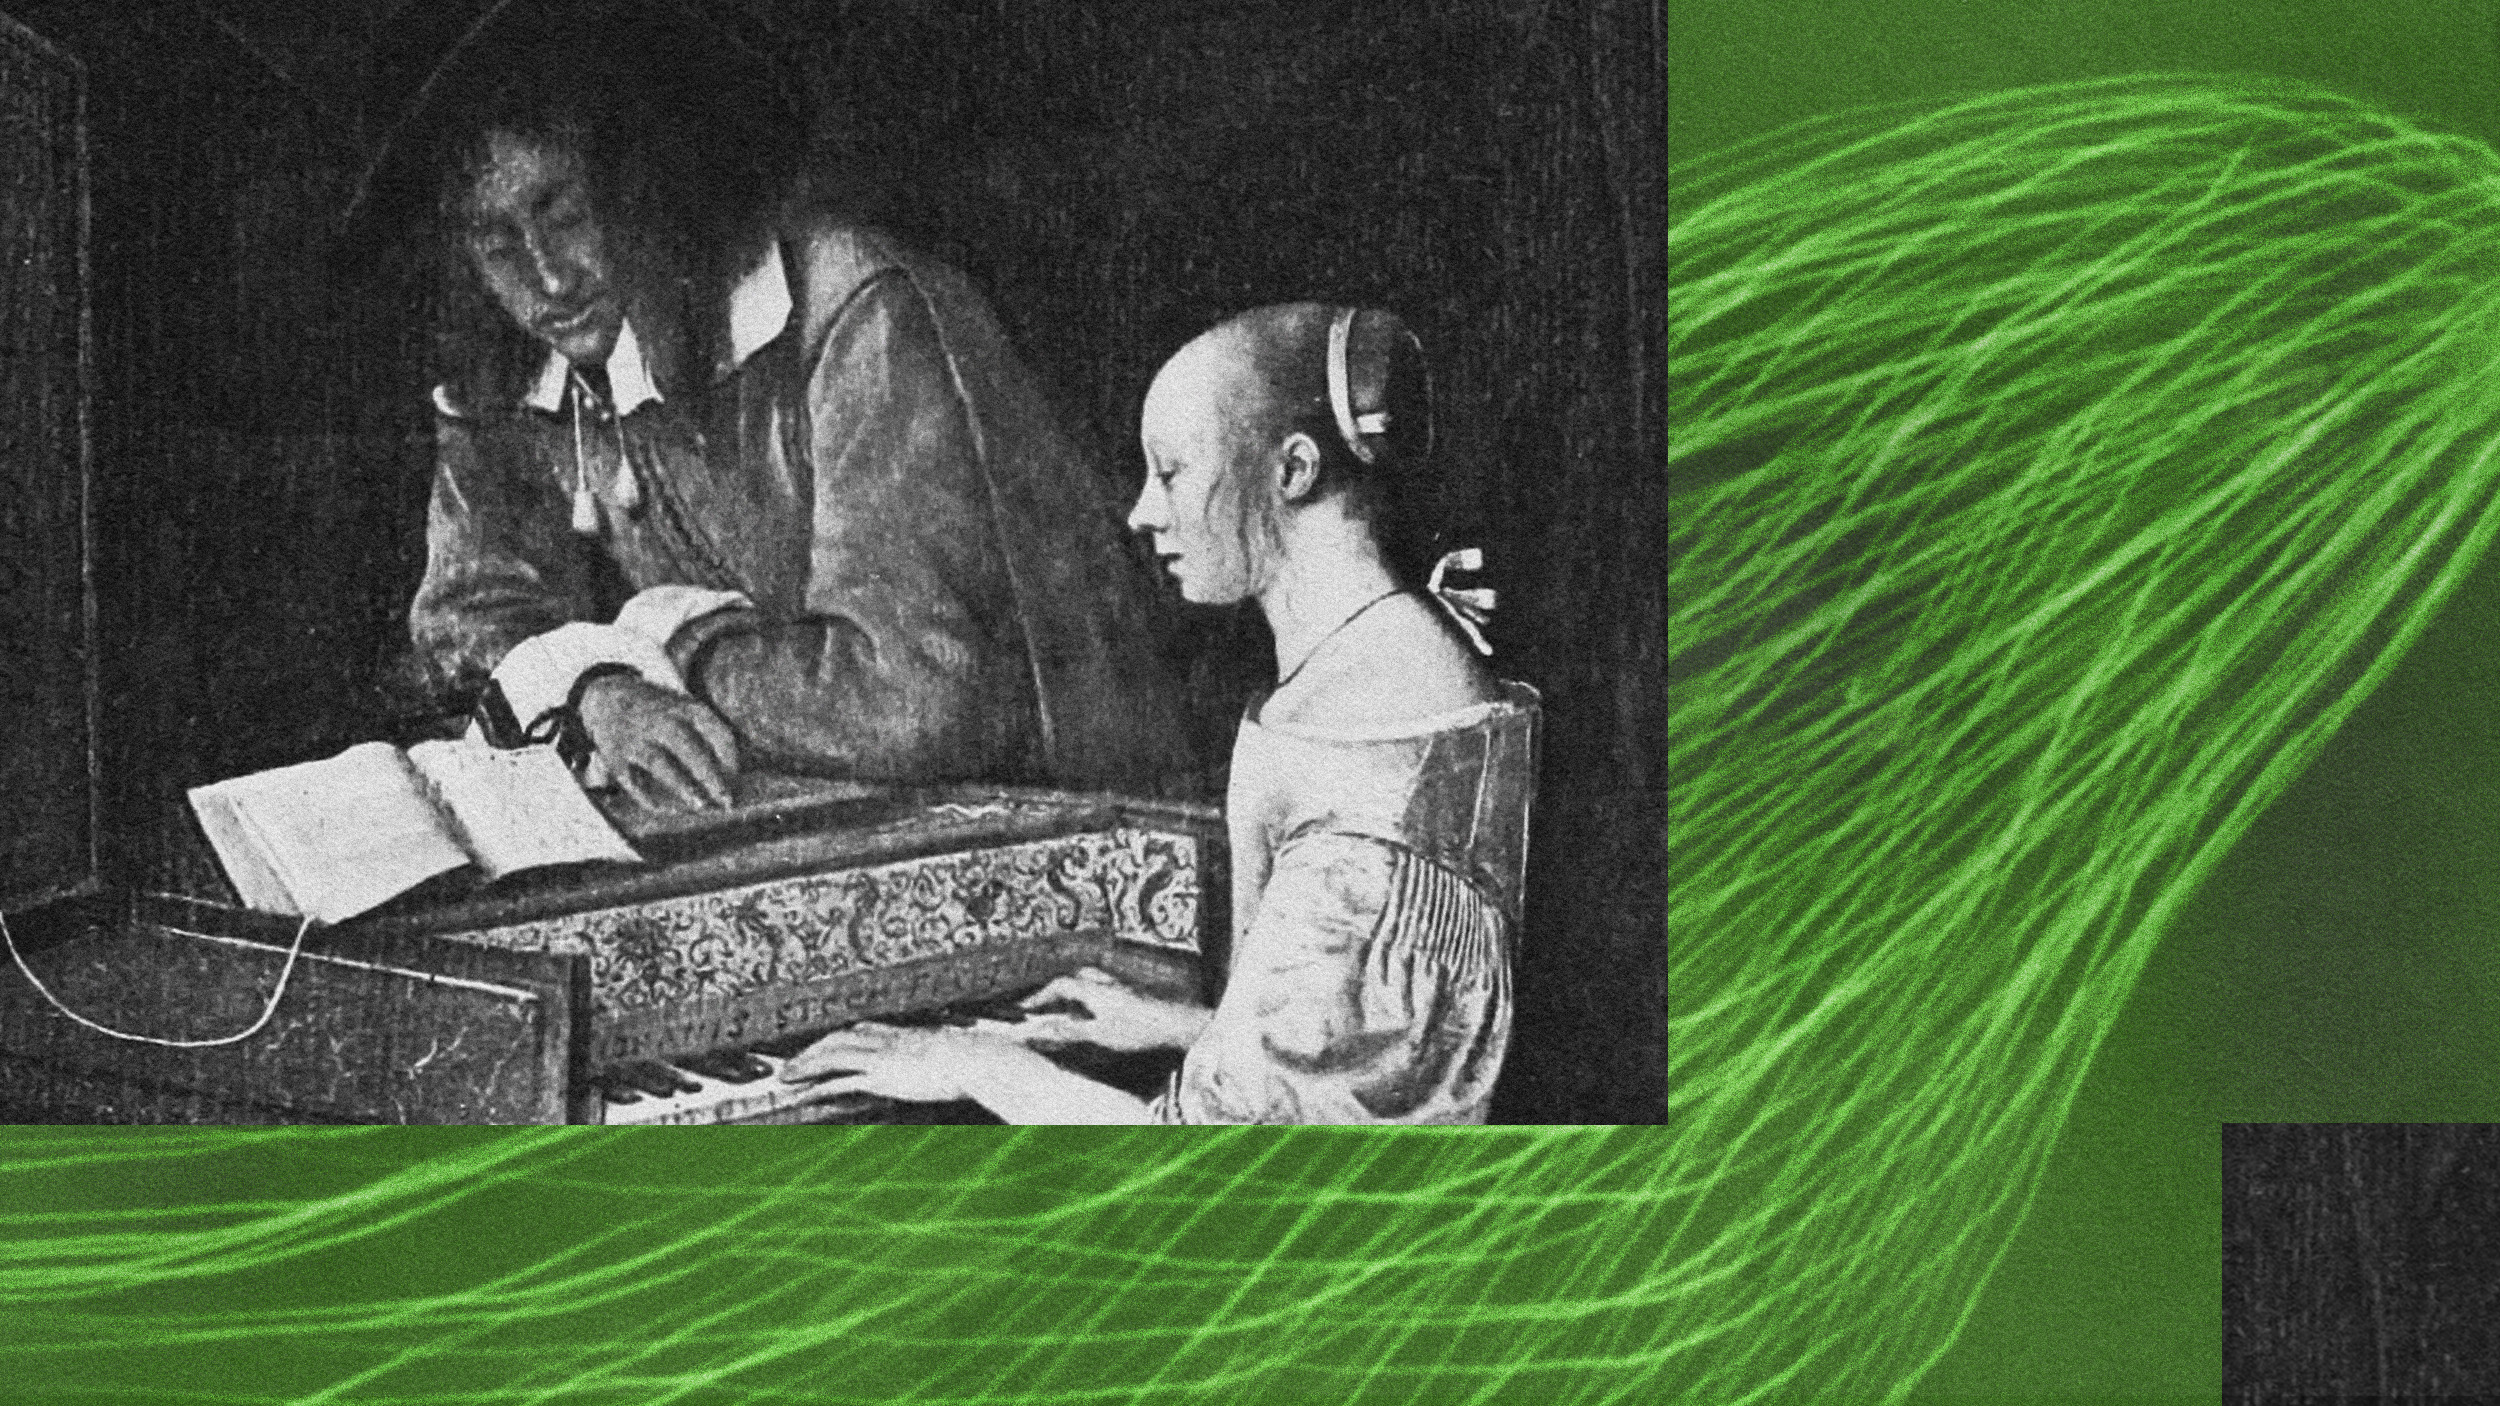 A person wearing traditional clothing skillfully plays a keyboard instrument while another person looks at a book. The background features a vibrant flowing green pattern.